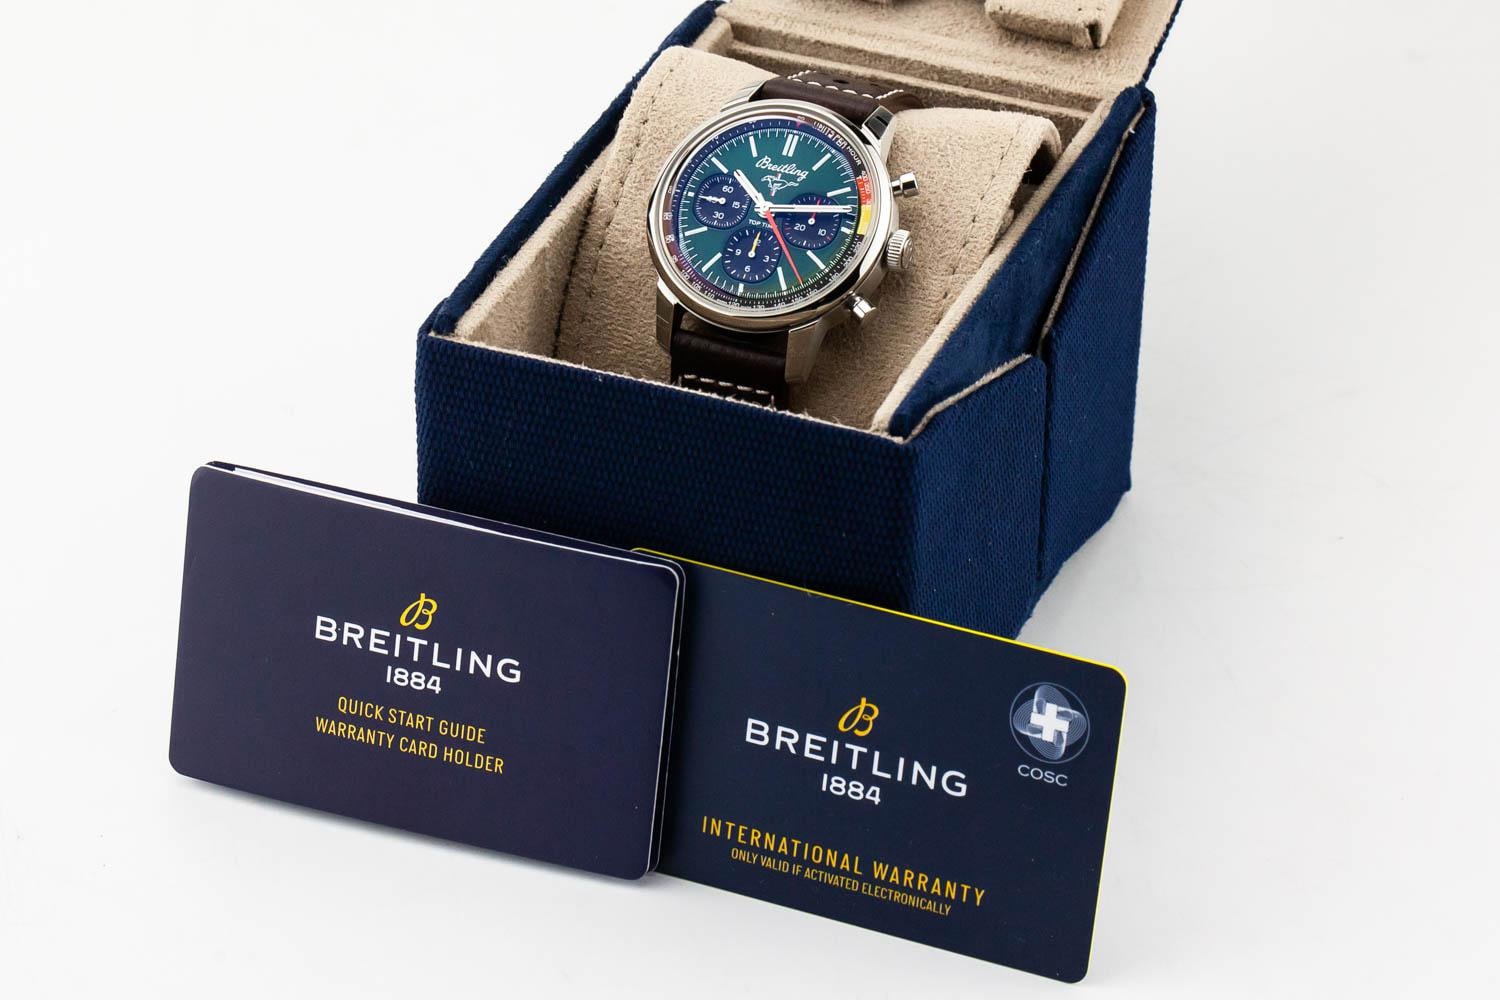 Breitling Top Time B01 Ford Mustang Esfera verde 41 AB01762A1L1X1